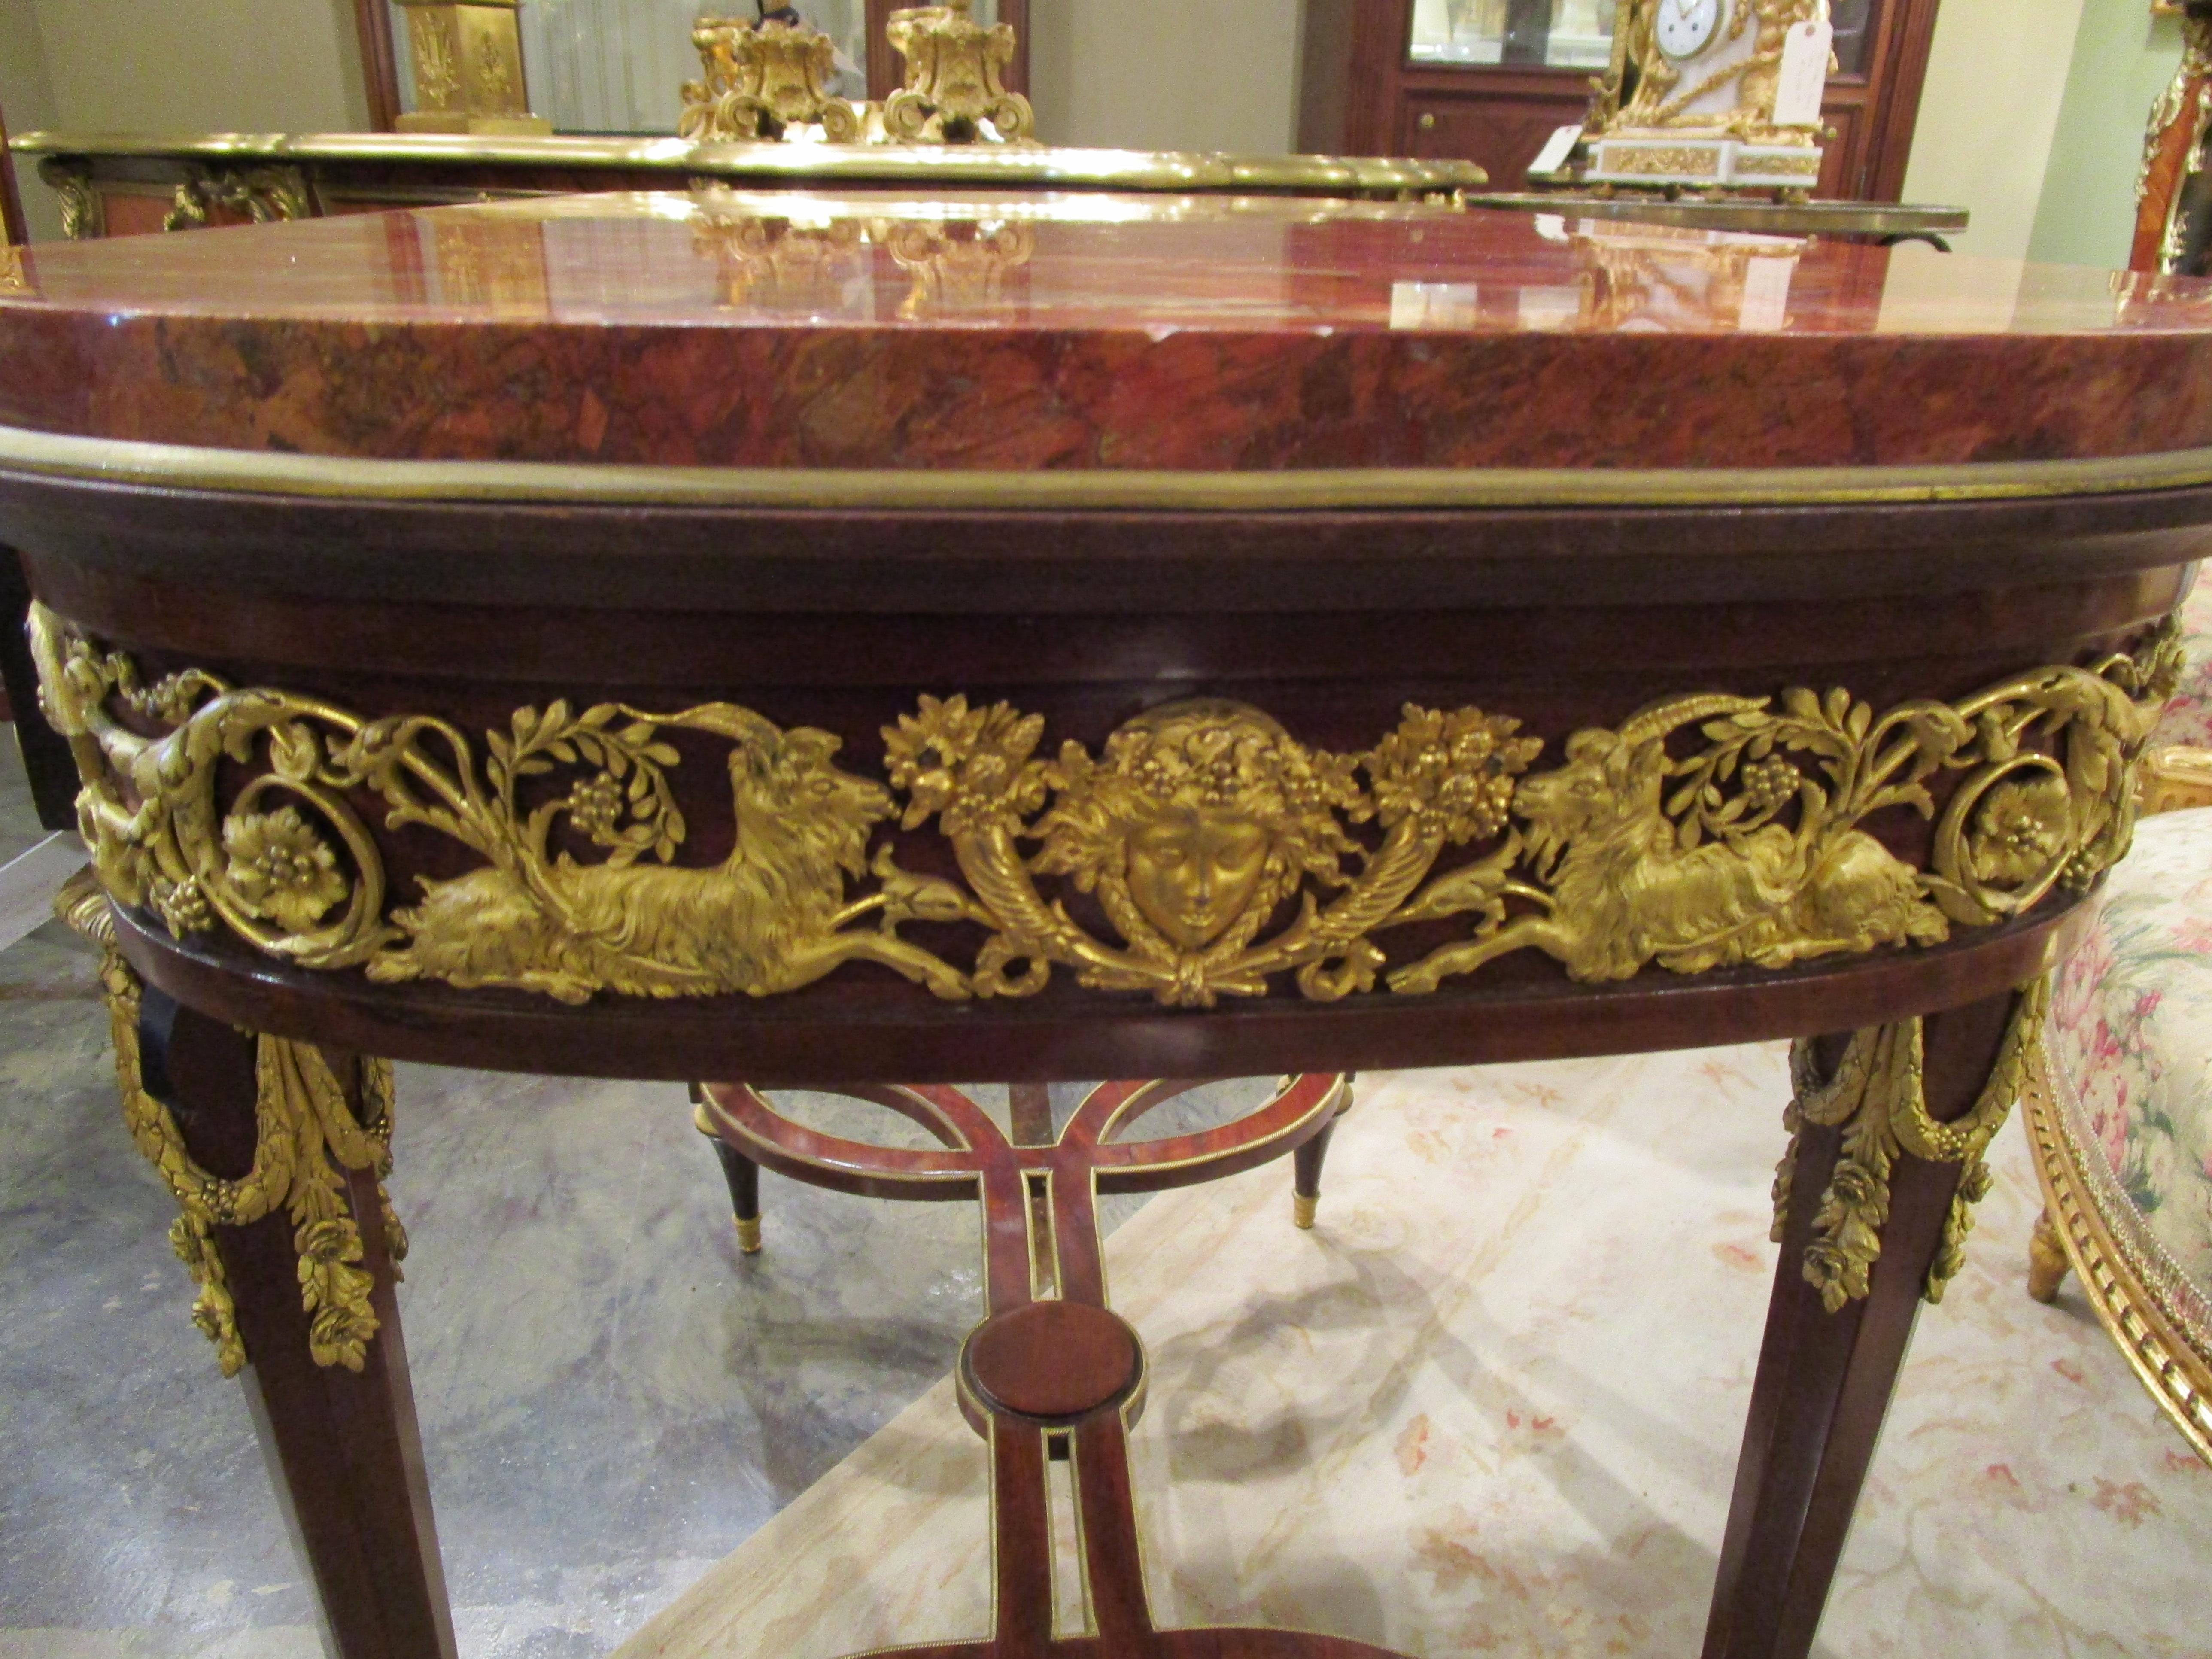 Bronze A fine 19th c French Louis XVI mahogany and gilt bronze mounted centertable